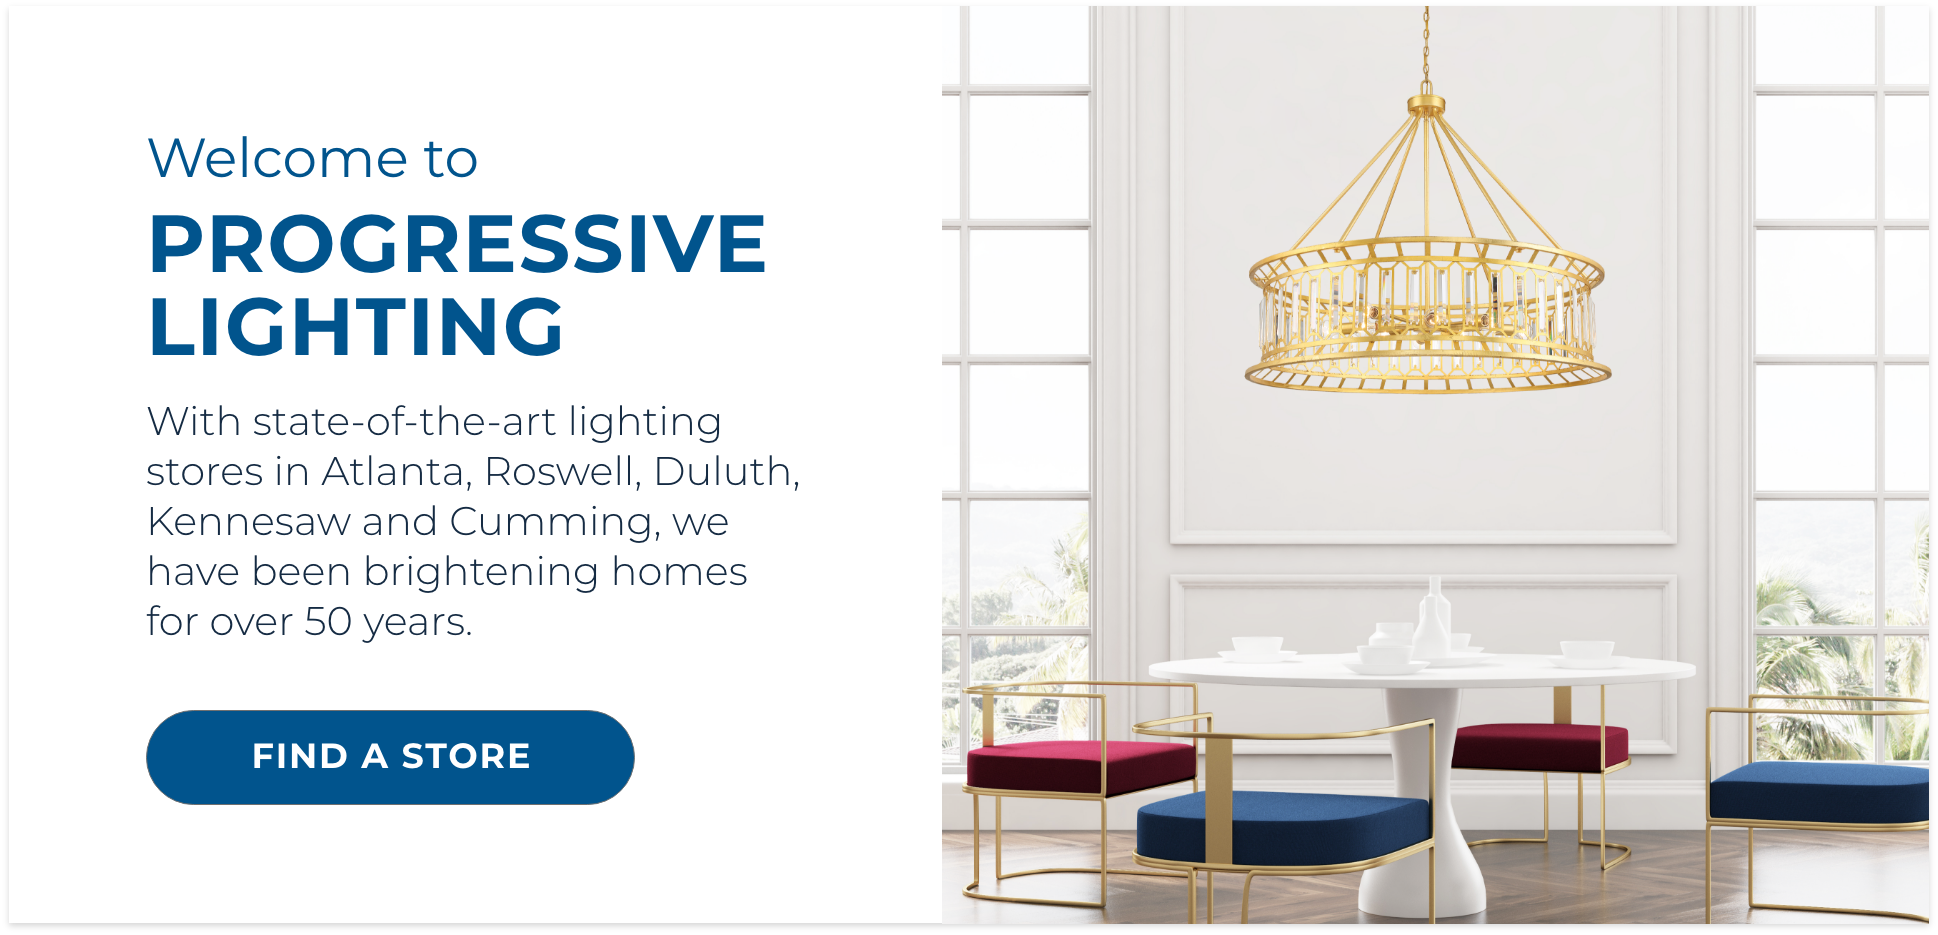 Welcome to Progressive Lighting! With state-of-the-art lighting stores in Atlanta, Roswell, Duluth, Kennesaw and Cumming, we have been brightening homes for over 50 years.